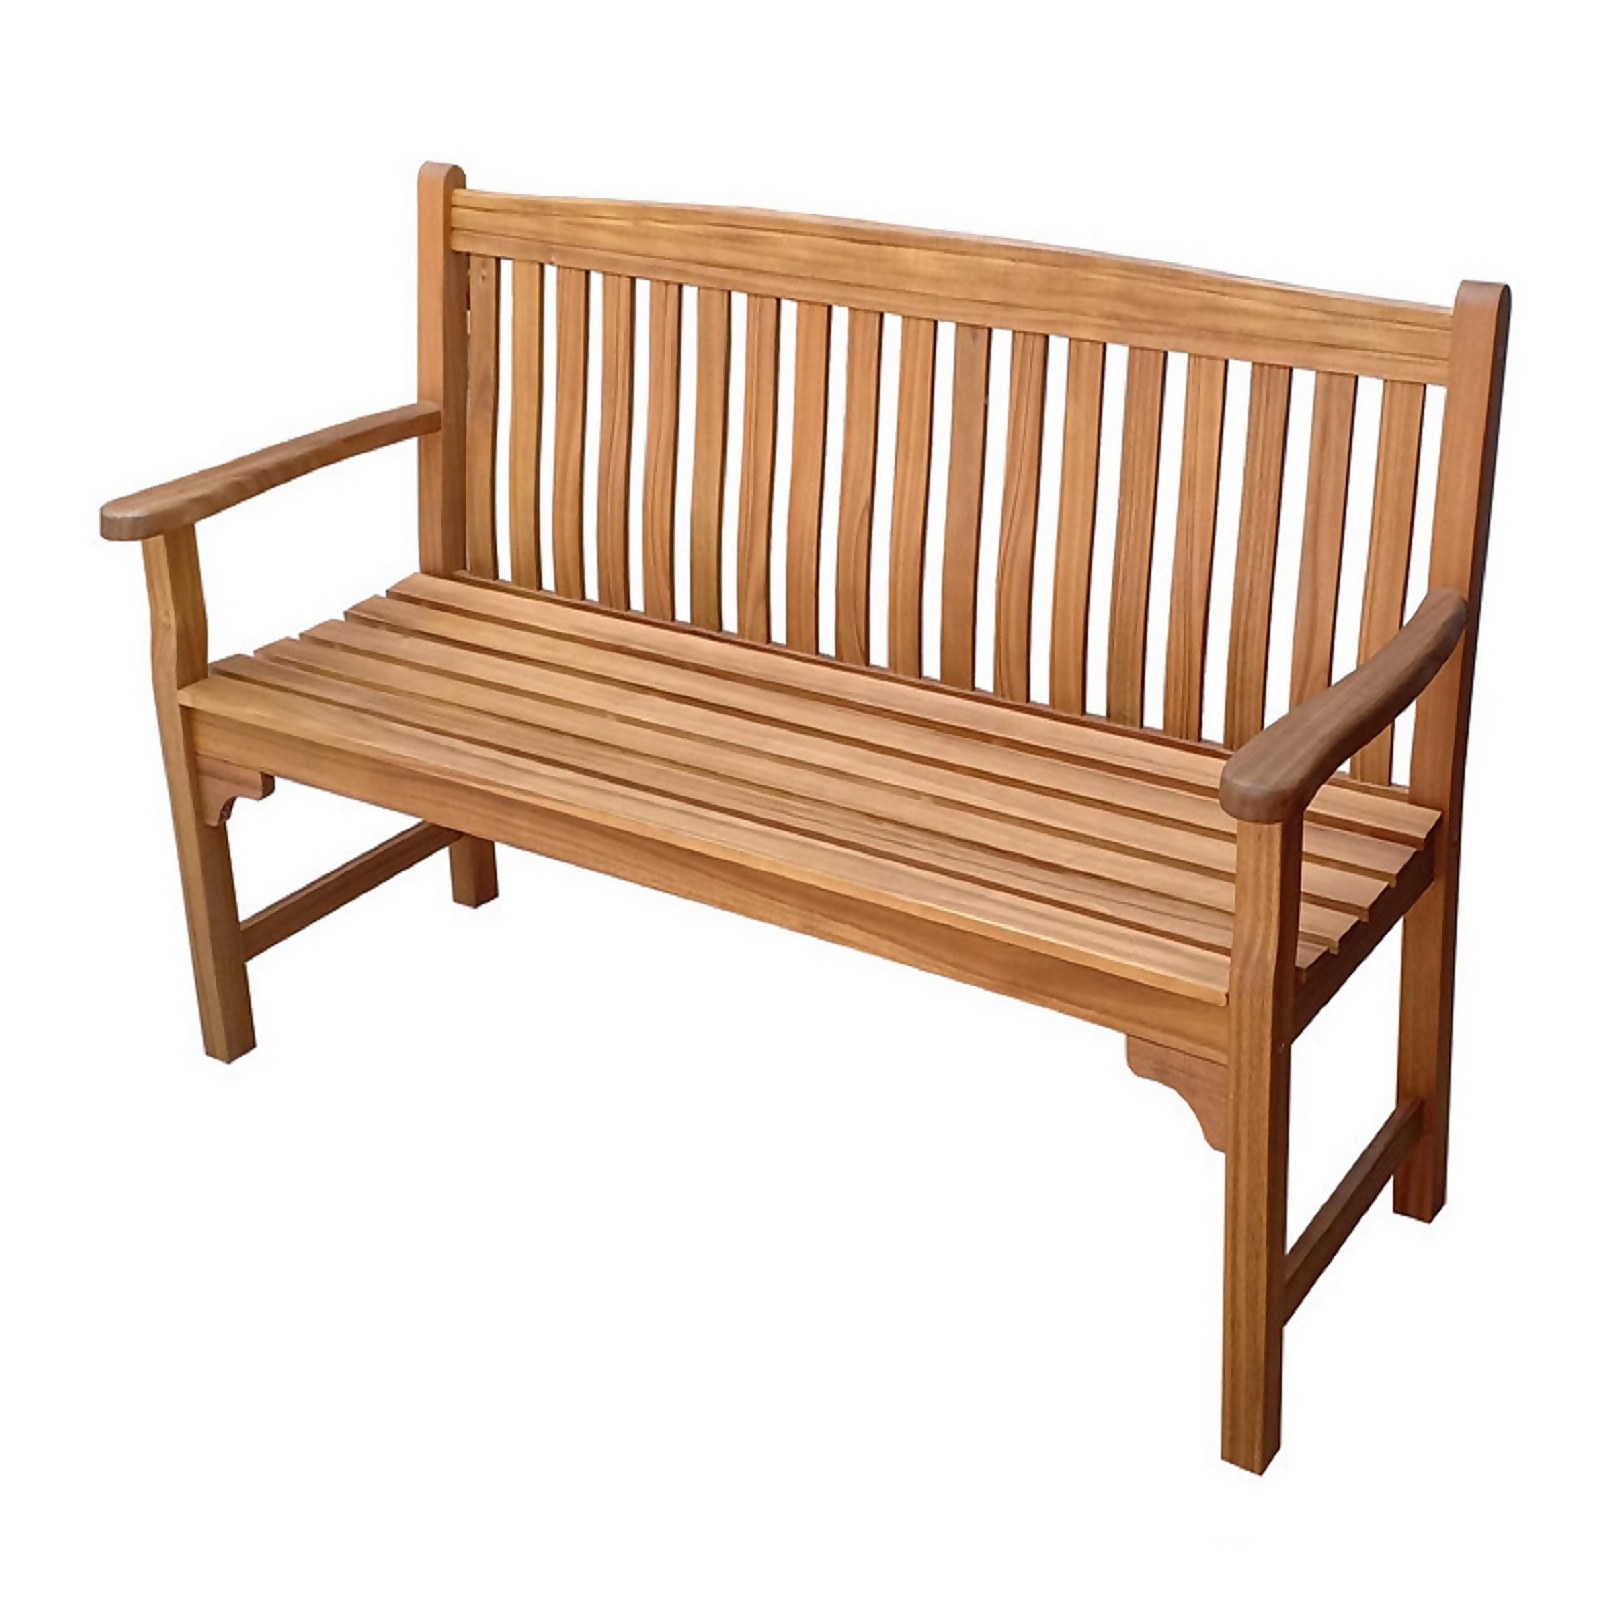 Photo of Hungate 3 Seater Garden Bench